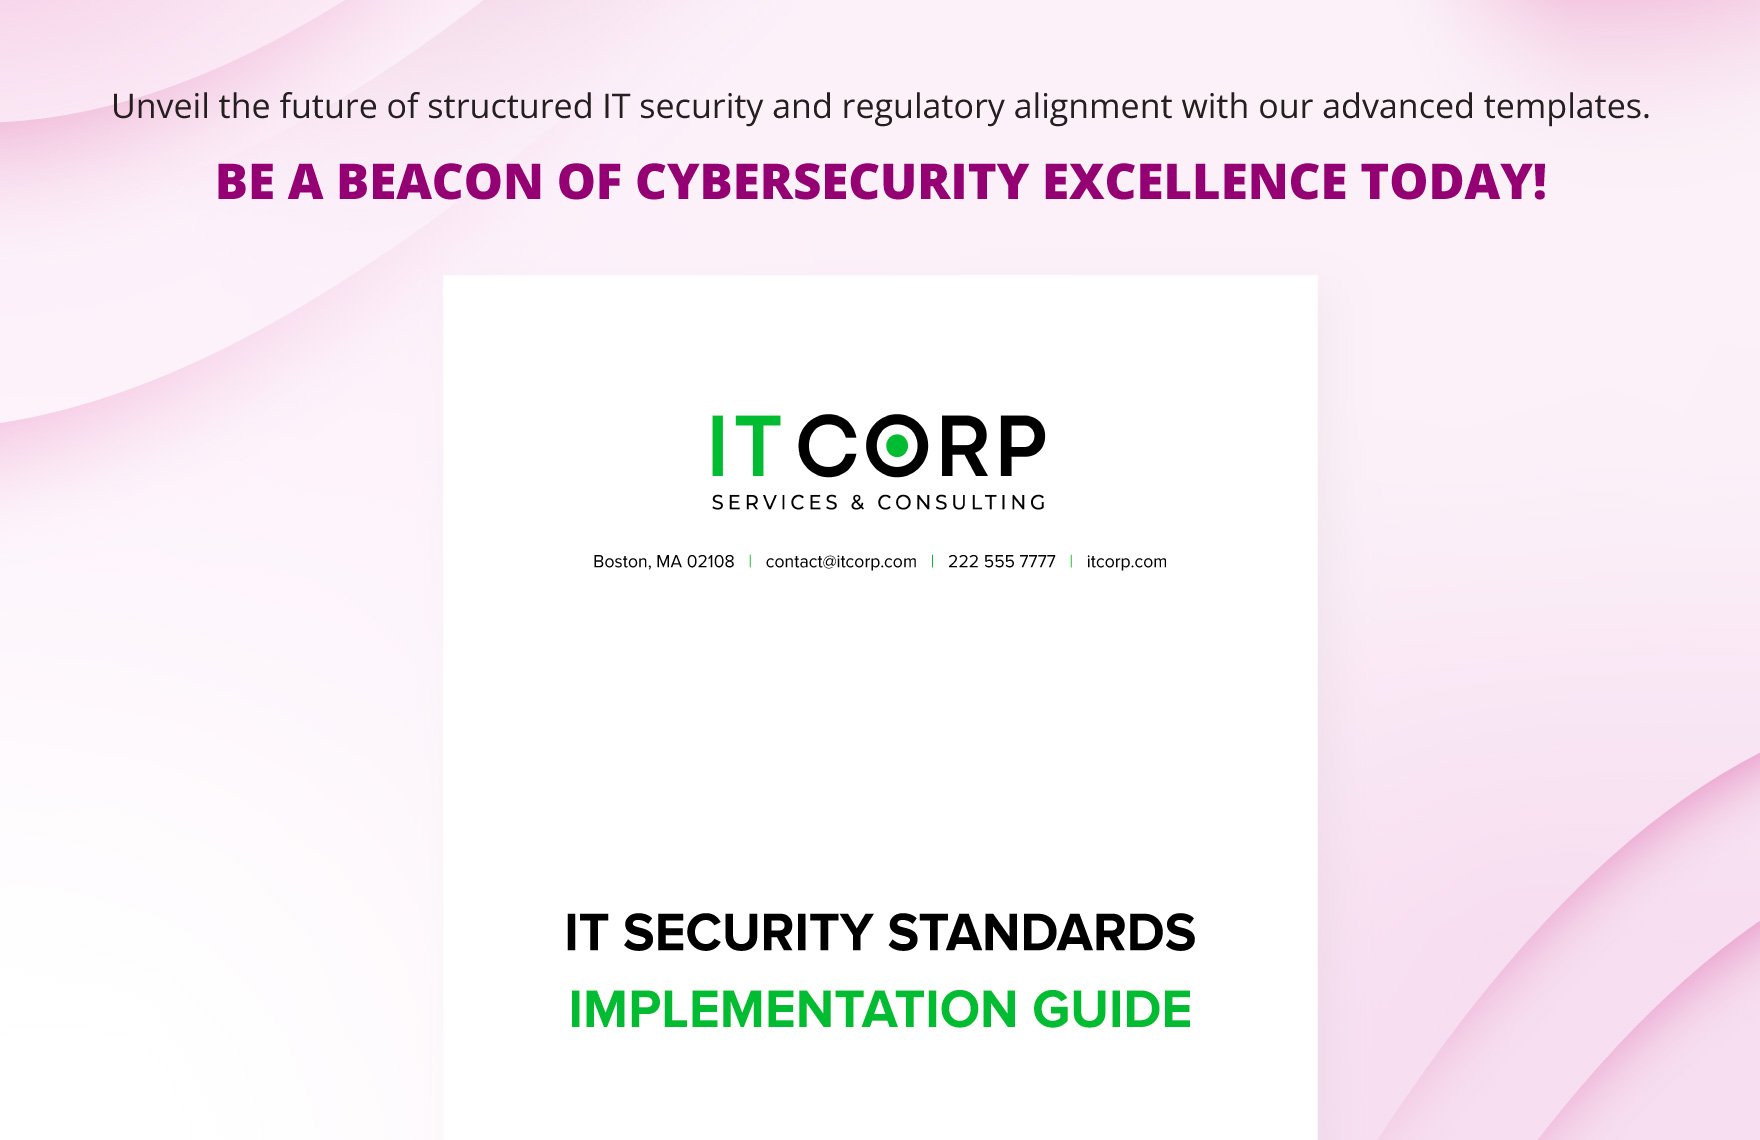 IT Security Standards Implementation Guide Template